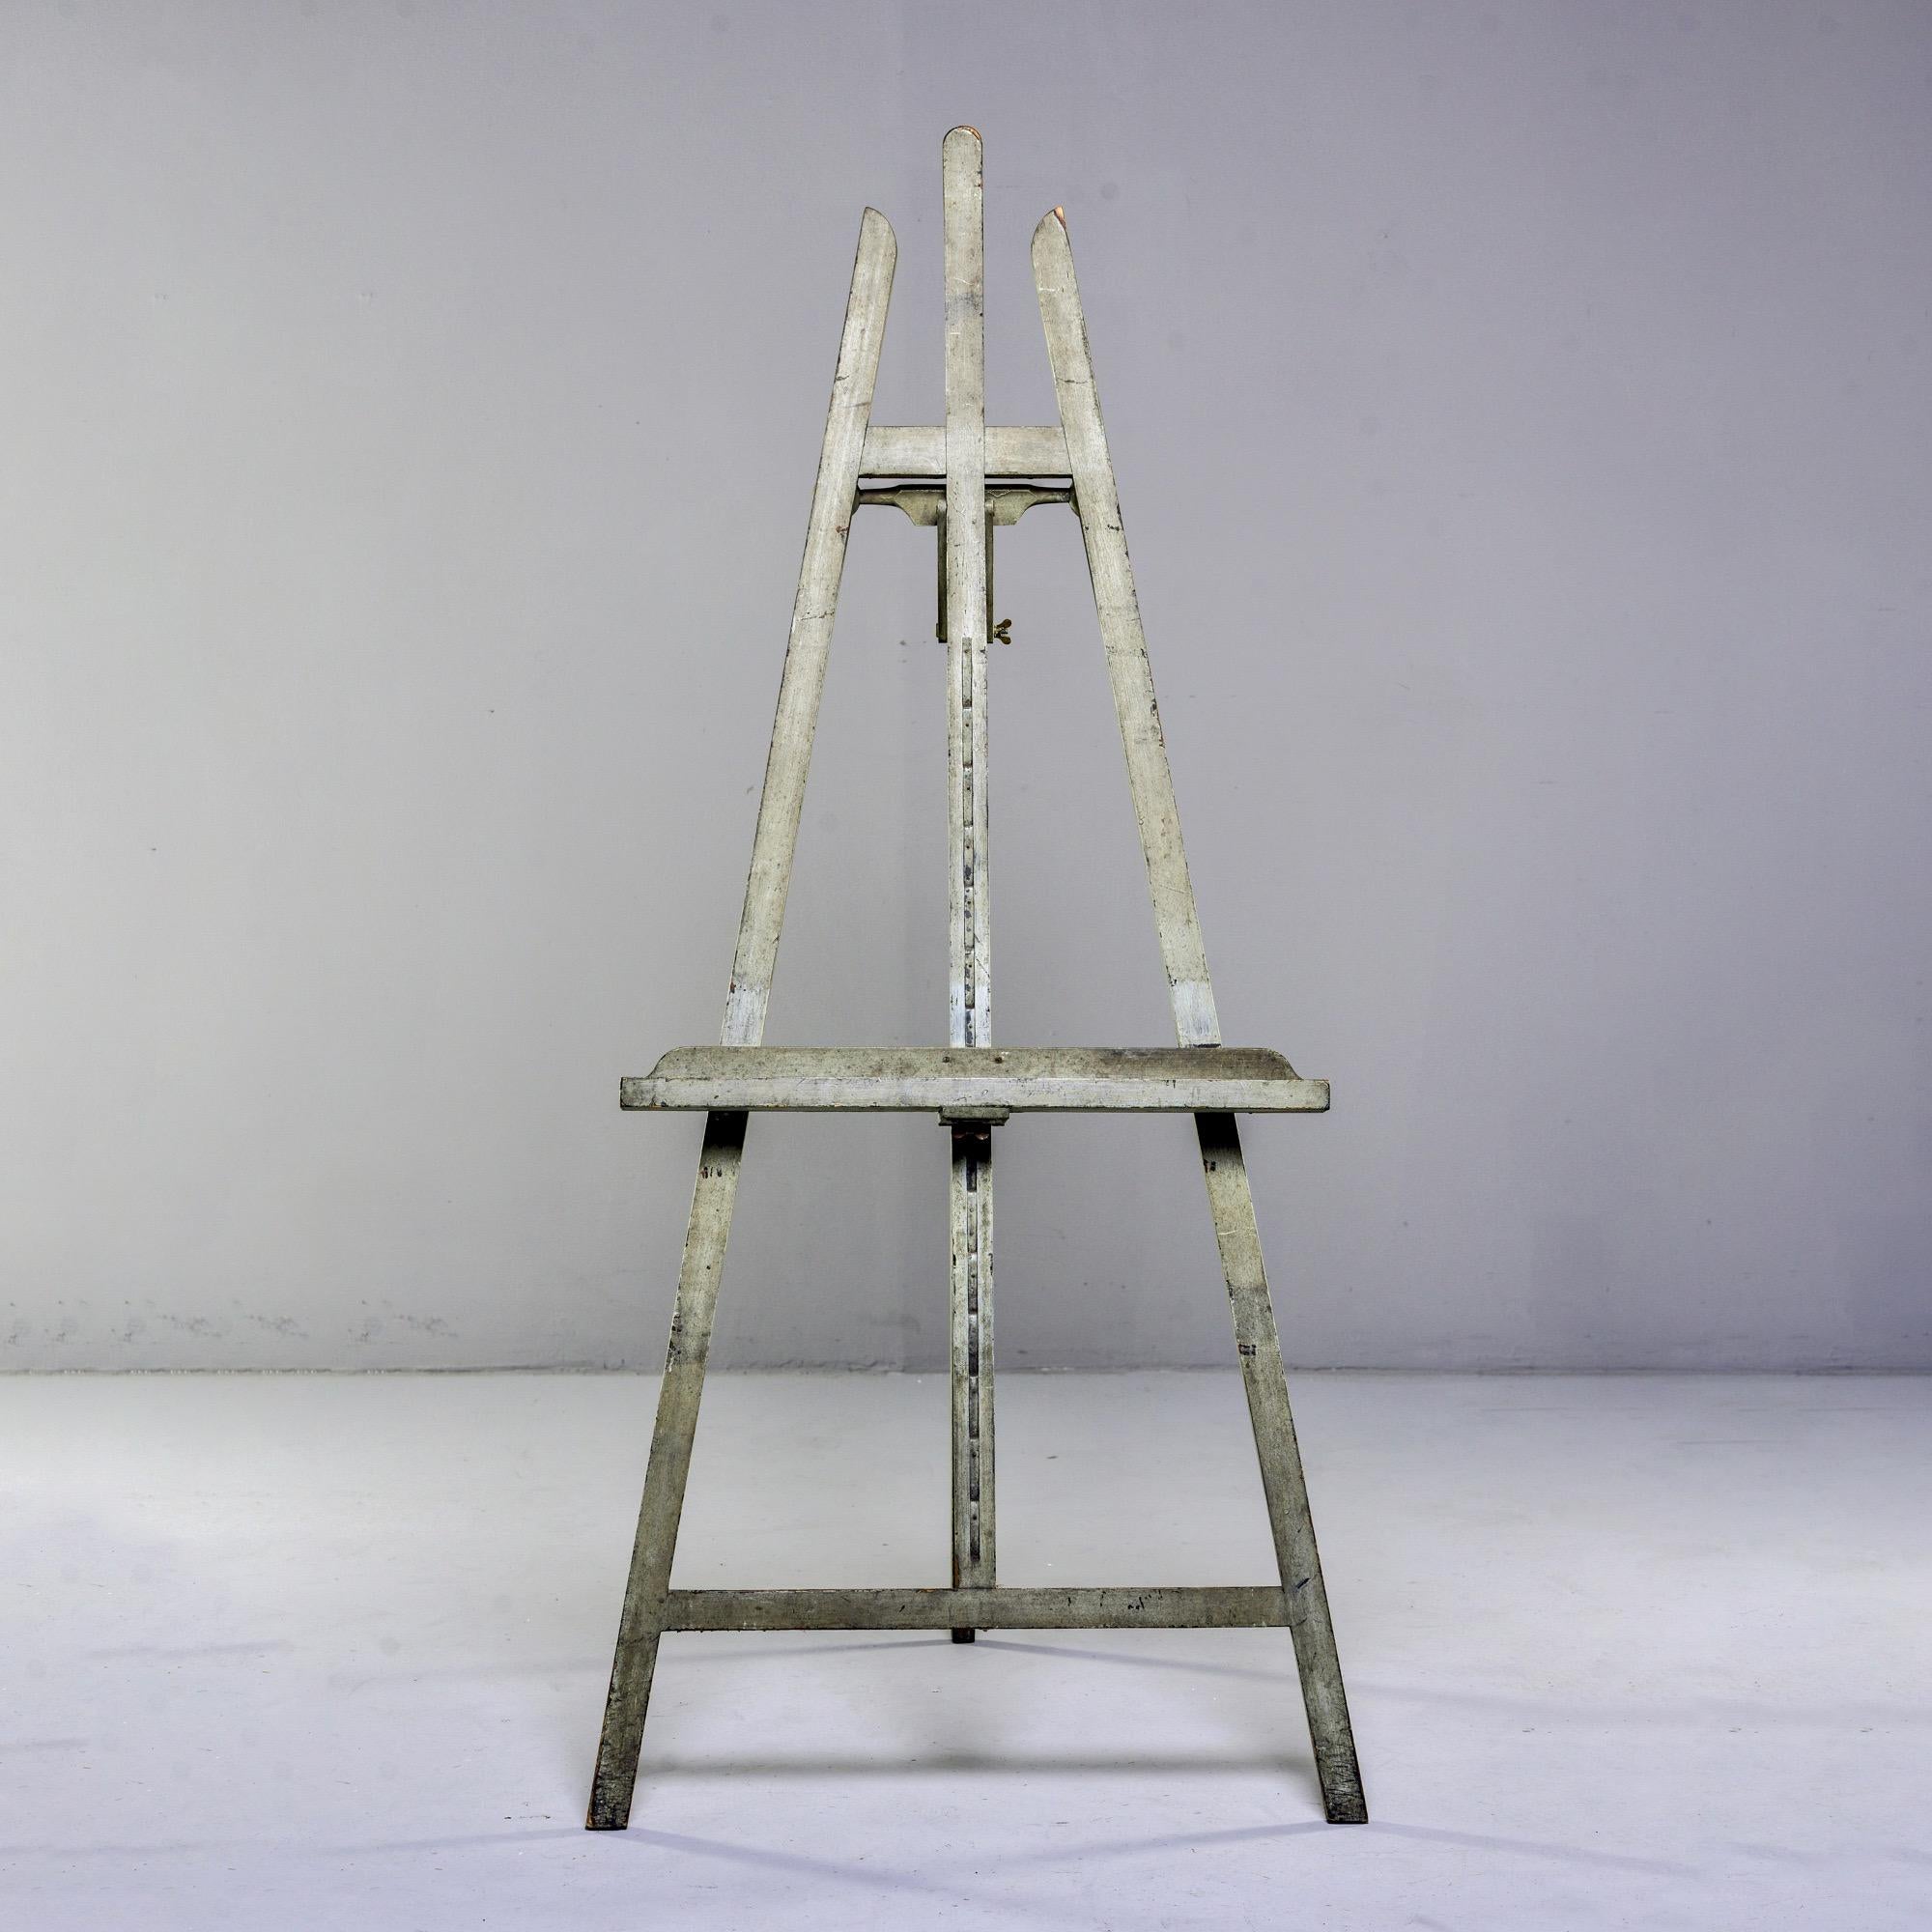 English wooden standing easel with gray green painted finish, circa 1930s.

Depth folded: 6”
Depth fully extended: 57”
Tray shelf is adjustable.
  